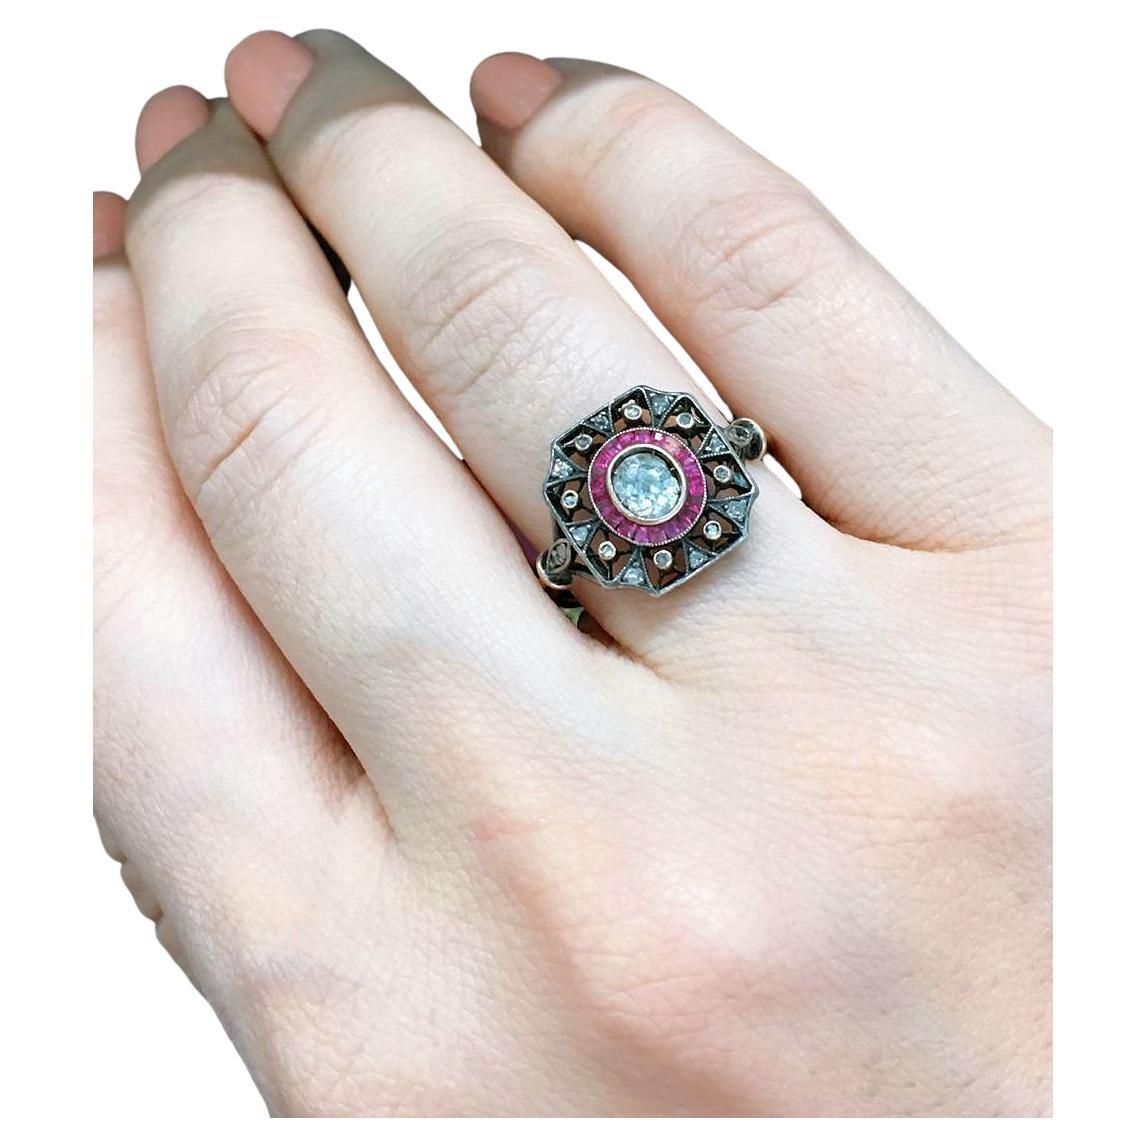 Antique ring in open work style centered with 1 old mine cut diamond estimate weight 0.40 carats flanked with baguet cut natural rubies and smaller diamonds ring is in 14k gold topped with silver dates back to 1900.c (note 1 small ruby missing)